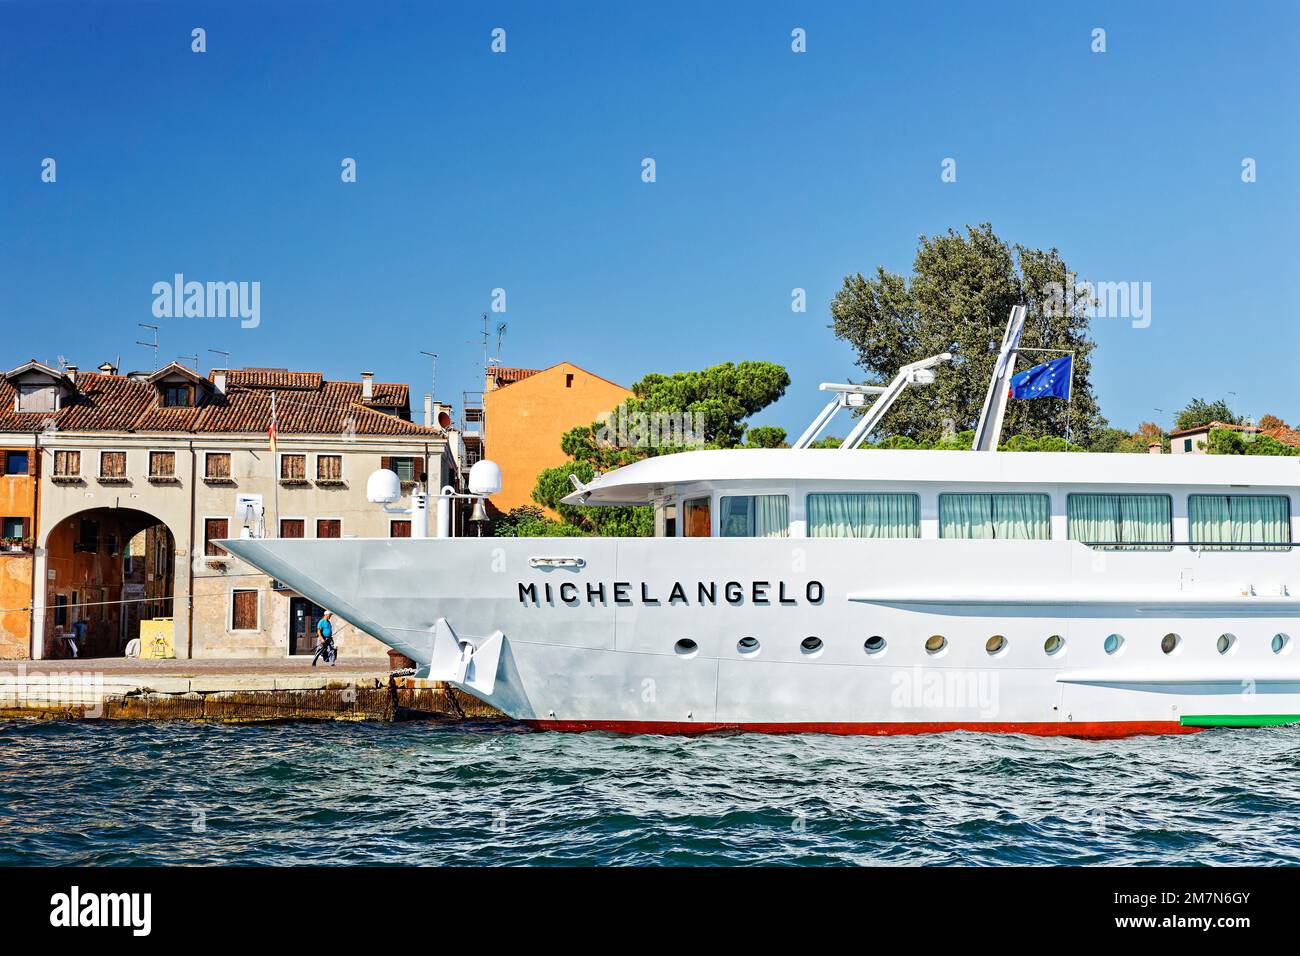 The river cruise ship 'Michelangelo' is underway around Venice. Here it is moored at a quay Stock Photo